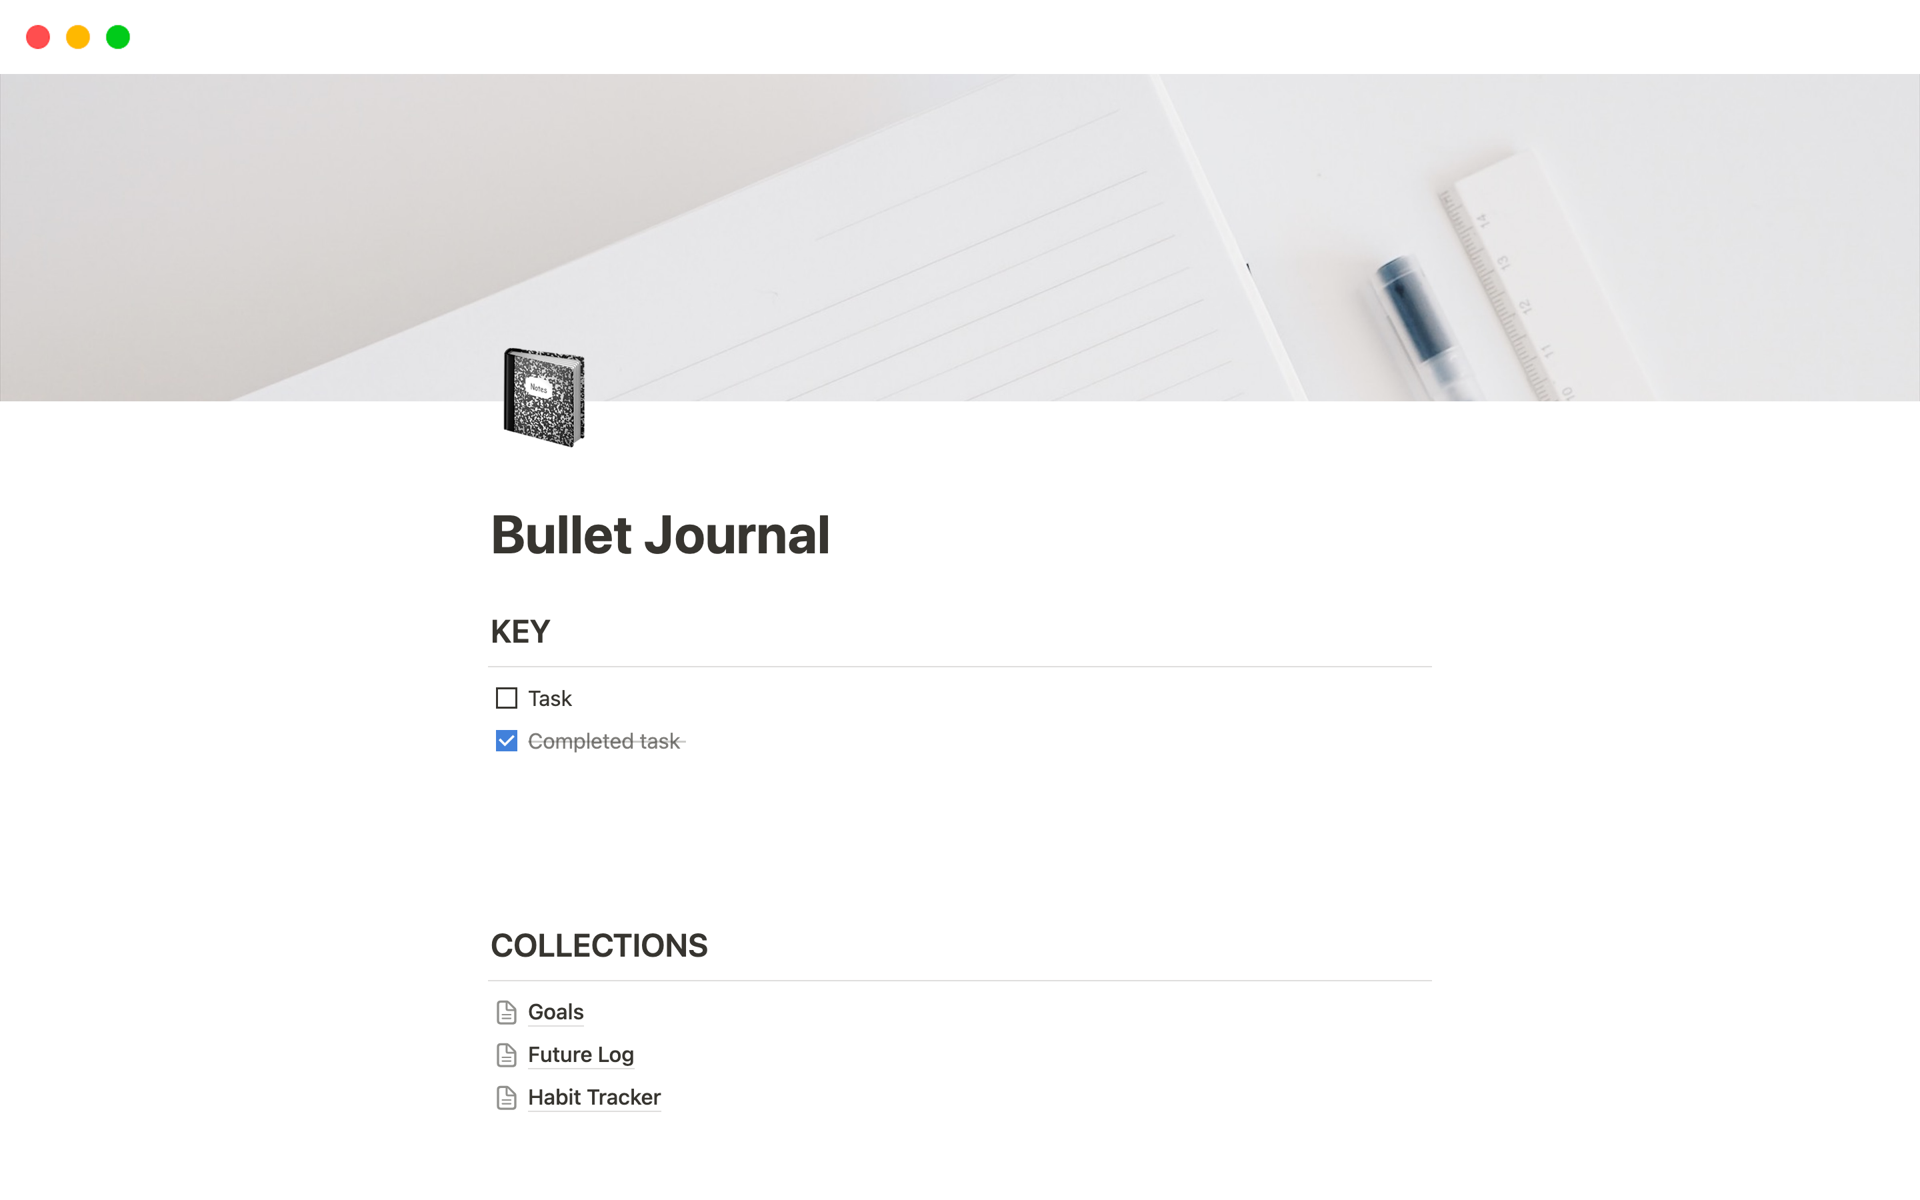 A minimal template that helps you get started with setting up your Notion bullet journal.